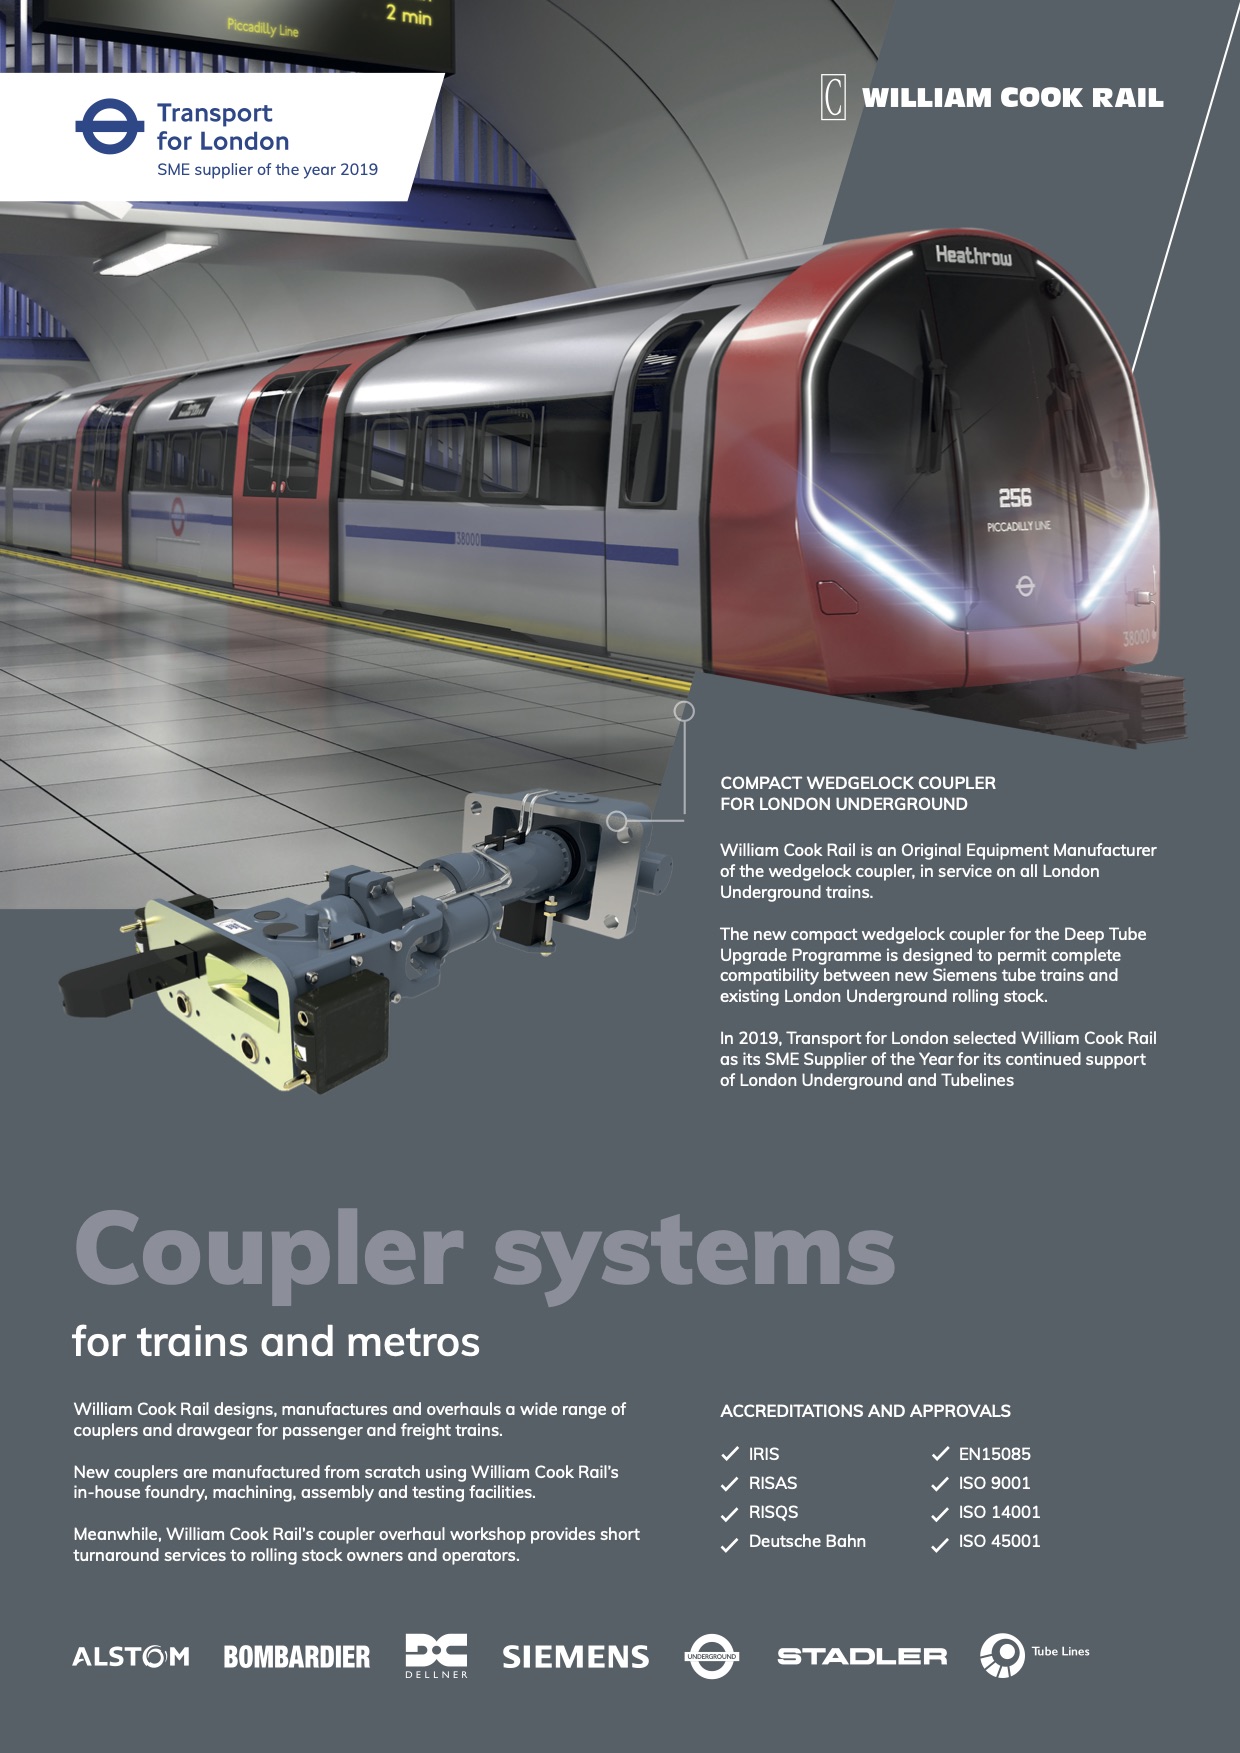 Coupler systems for trains and metros